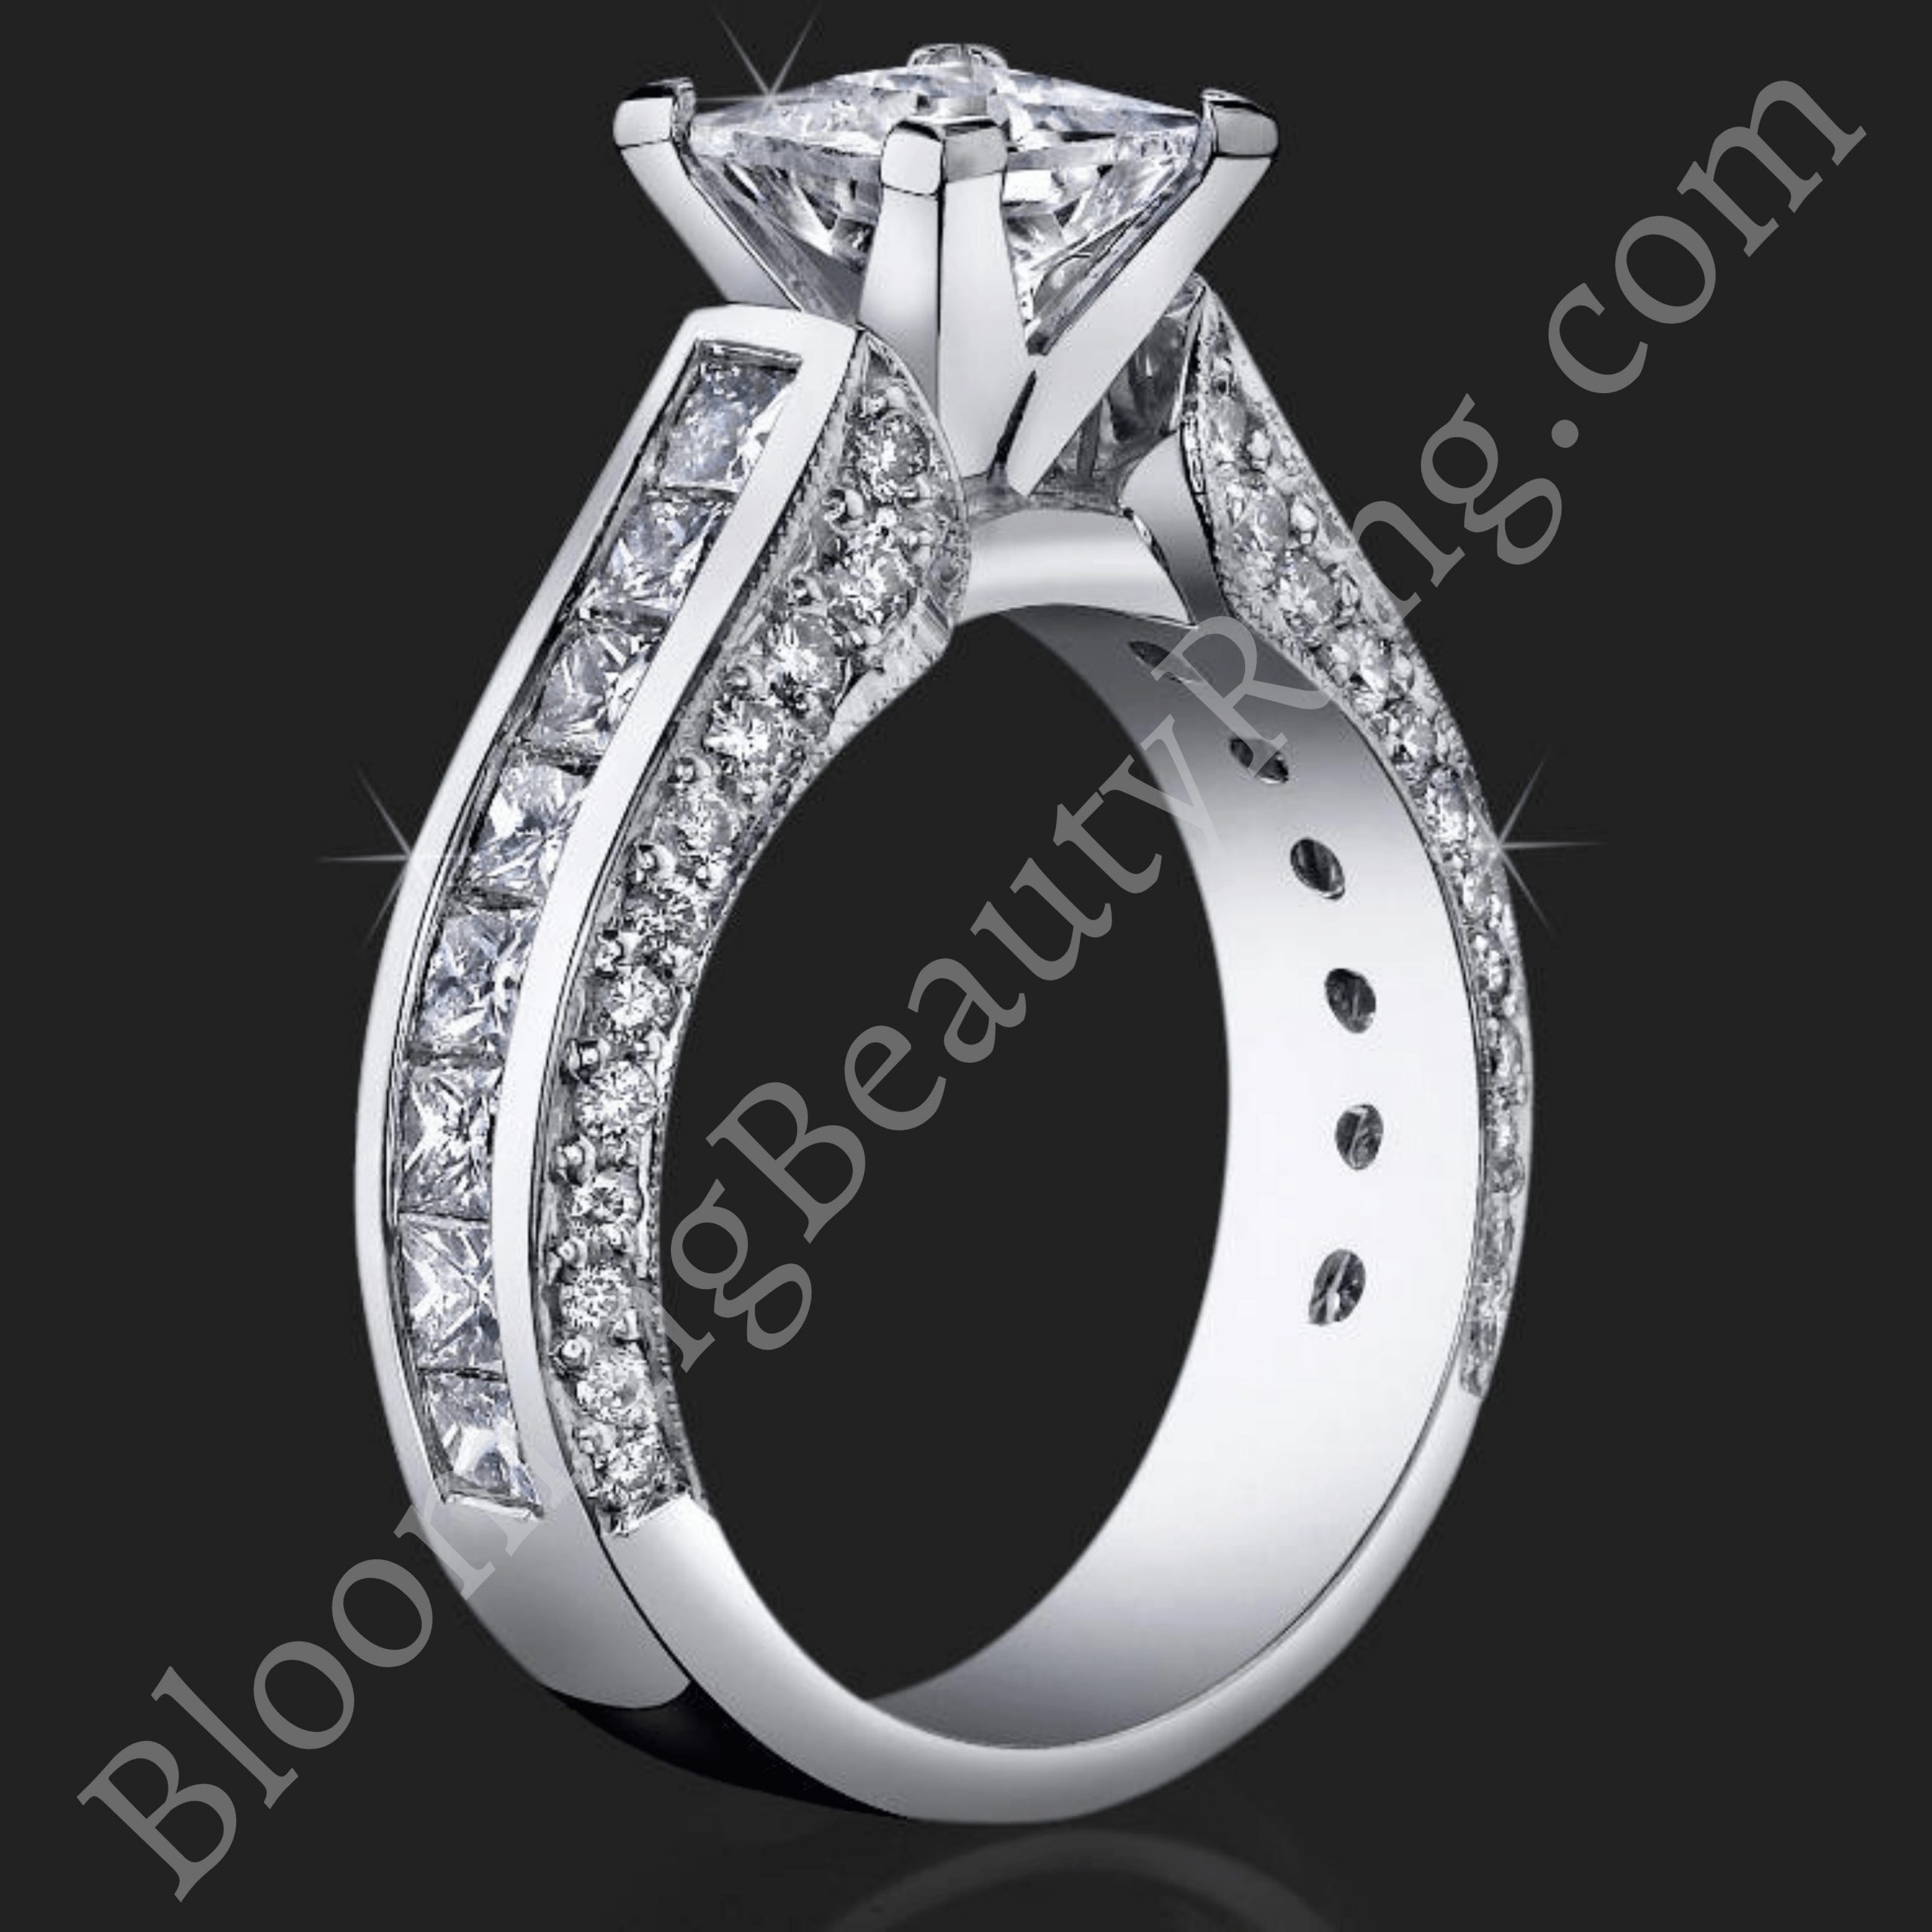 175-ctw-channel-set-princess-round-micro-pave-engagement-ring-bbr411-400x400 standing up